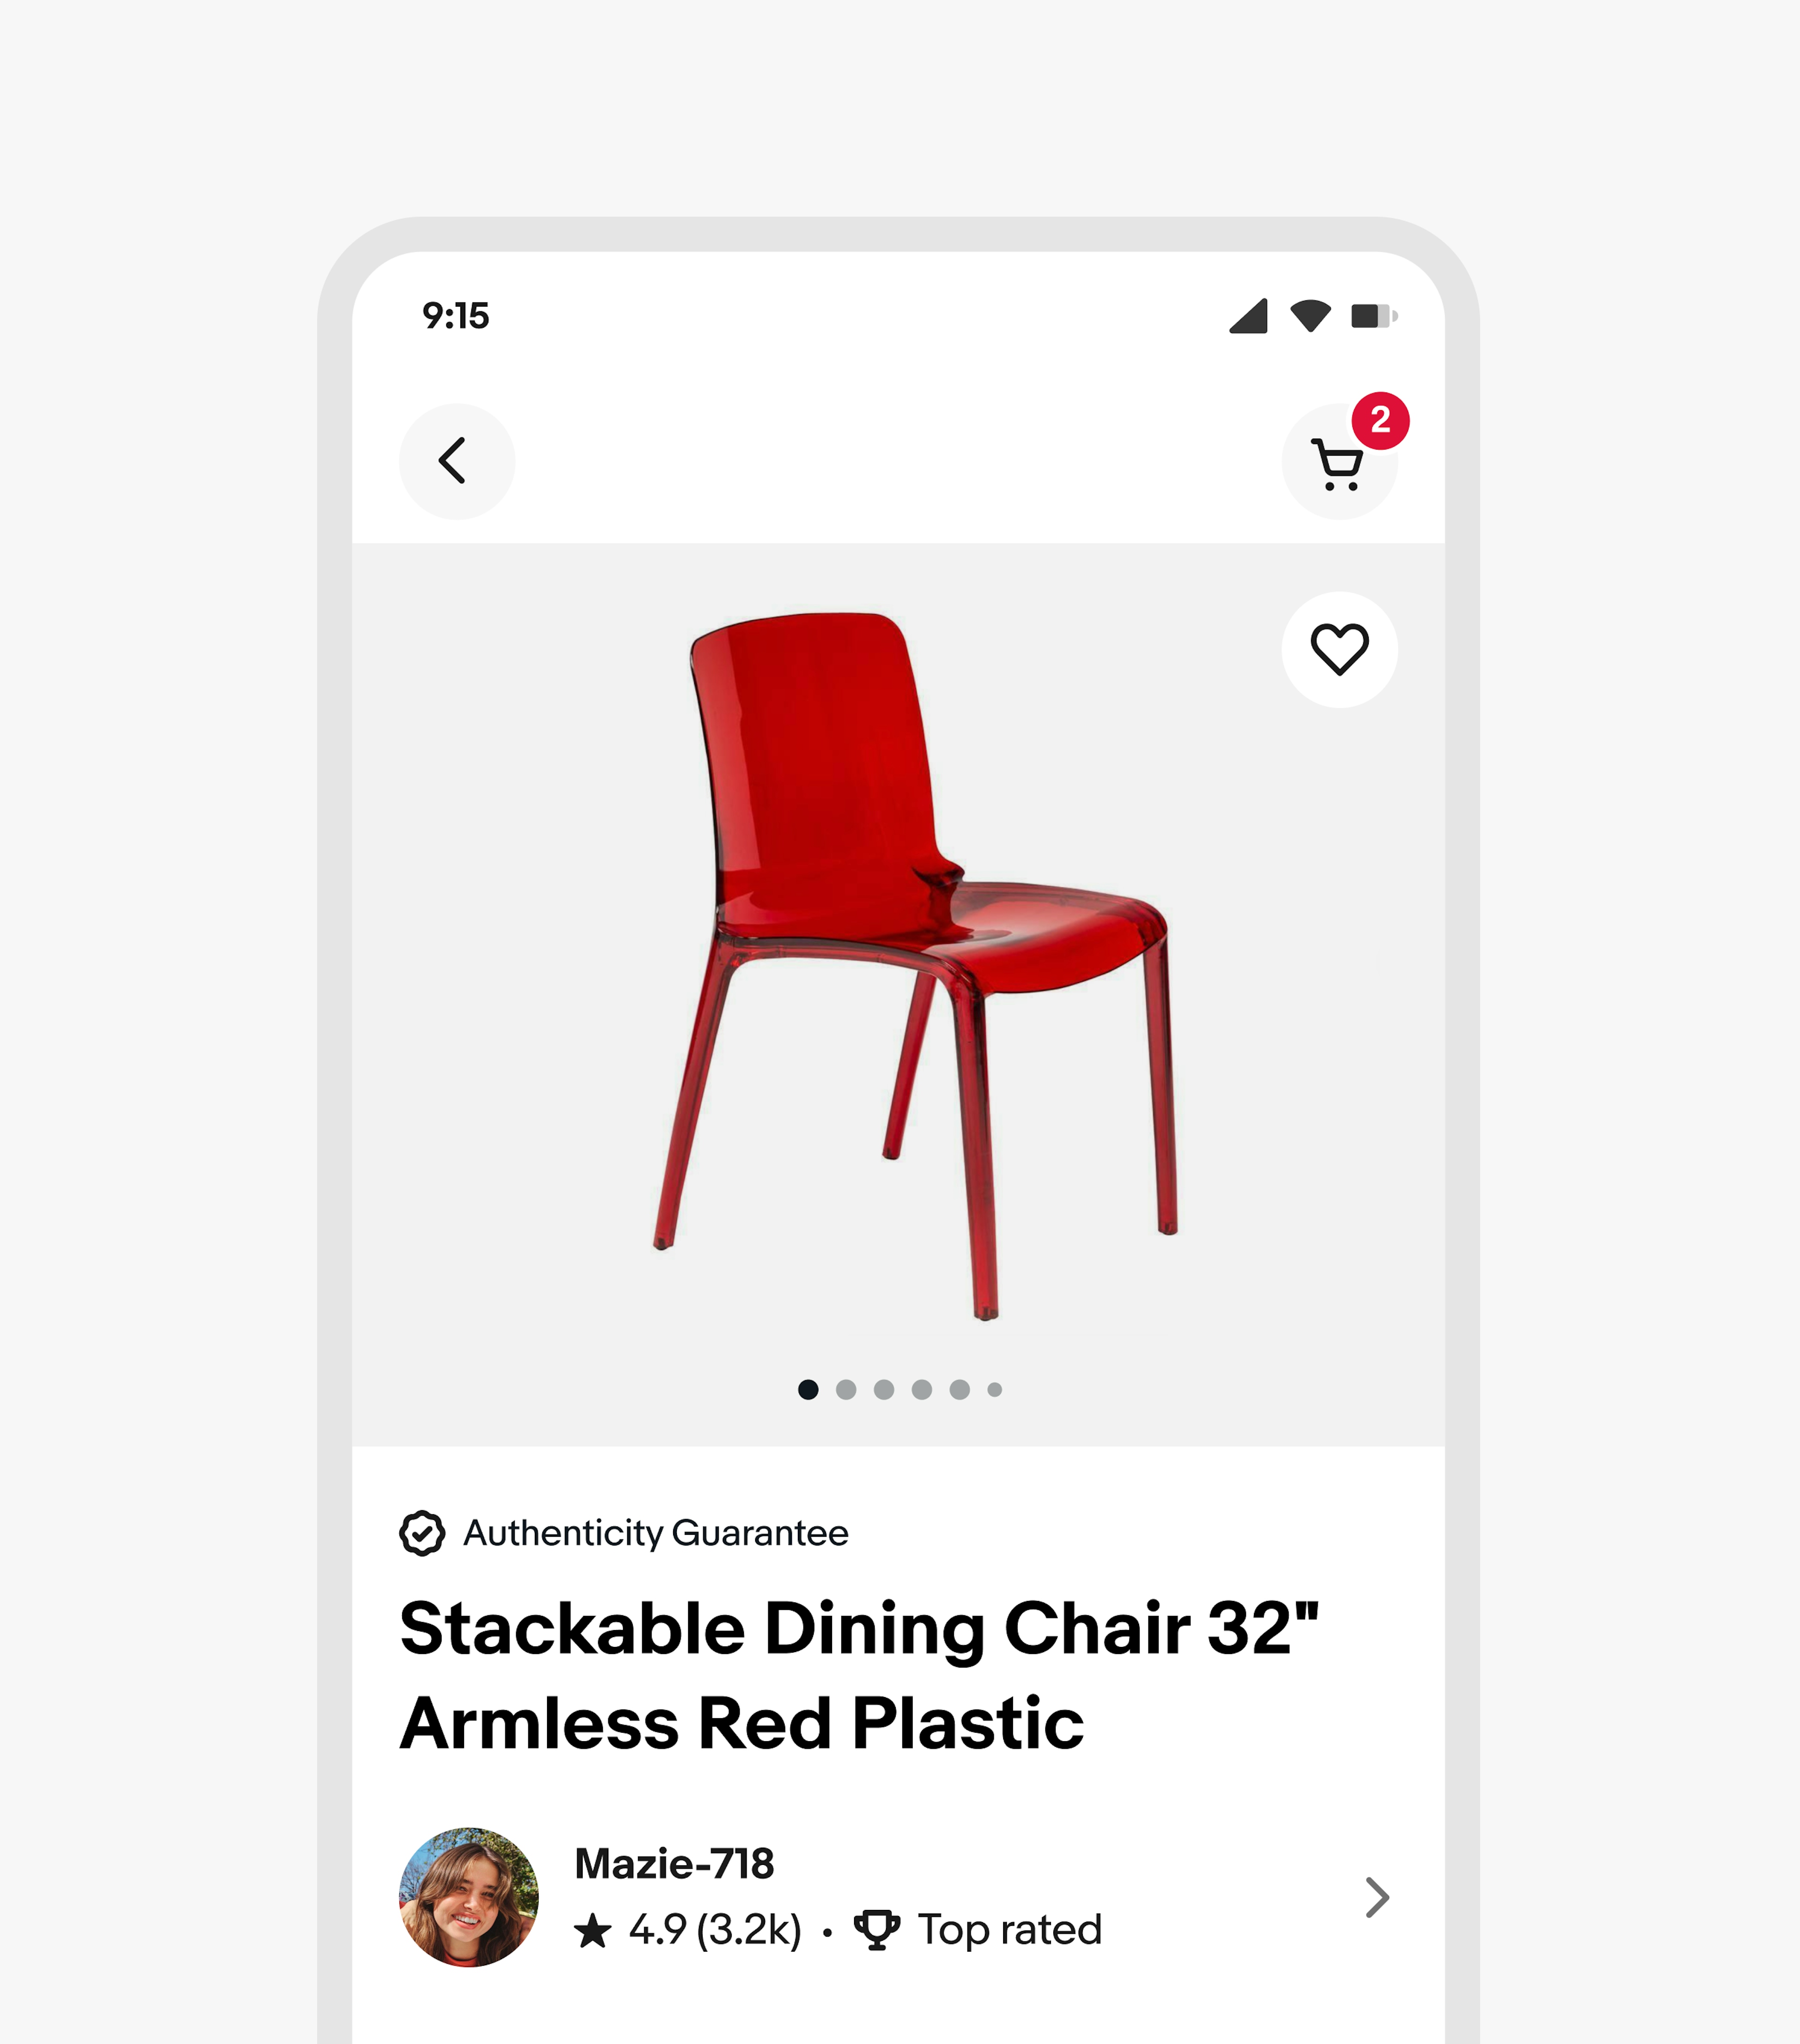 A UI screen featuring a red plastic chair.